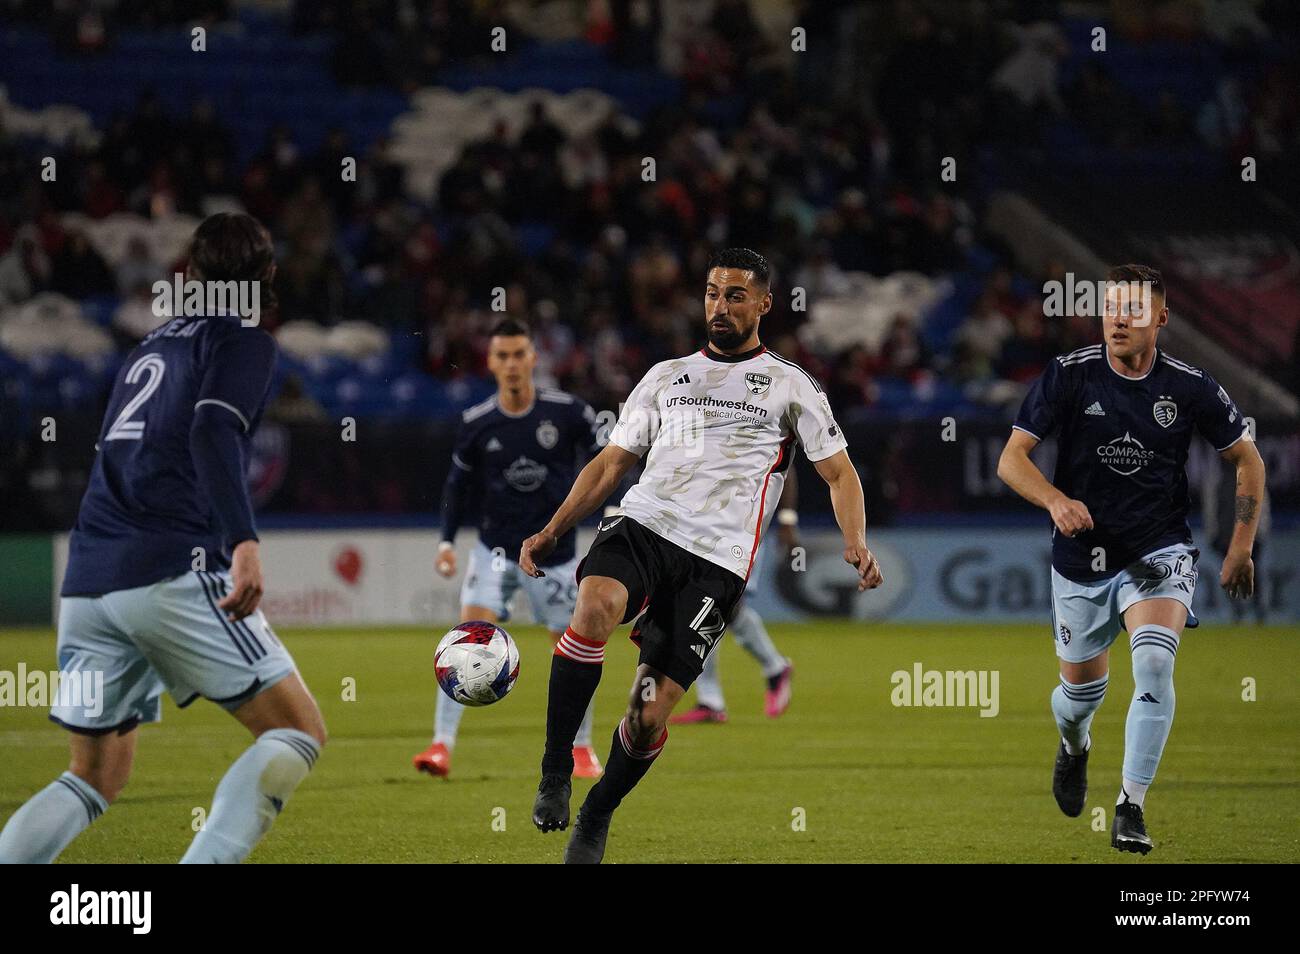 Frisco, United States. 18th Mar, 2023. March 18, 2023, Frisco, United States: FC Dallas midfielder Sebastian Lletget tries to control the ball during first half action of the MLS game between FC Dallas and Sporting KC at Toyota Stadium on March 18, 2023 in Frisco, Texas. (Photo by Javier Vicencio/ Credit: Eyepix Group/Alamy Live News Stock Photo